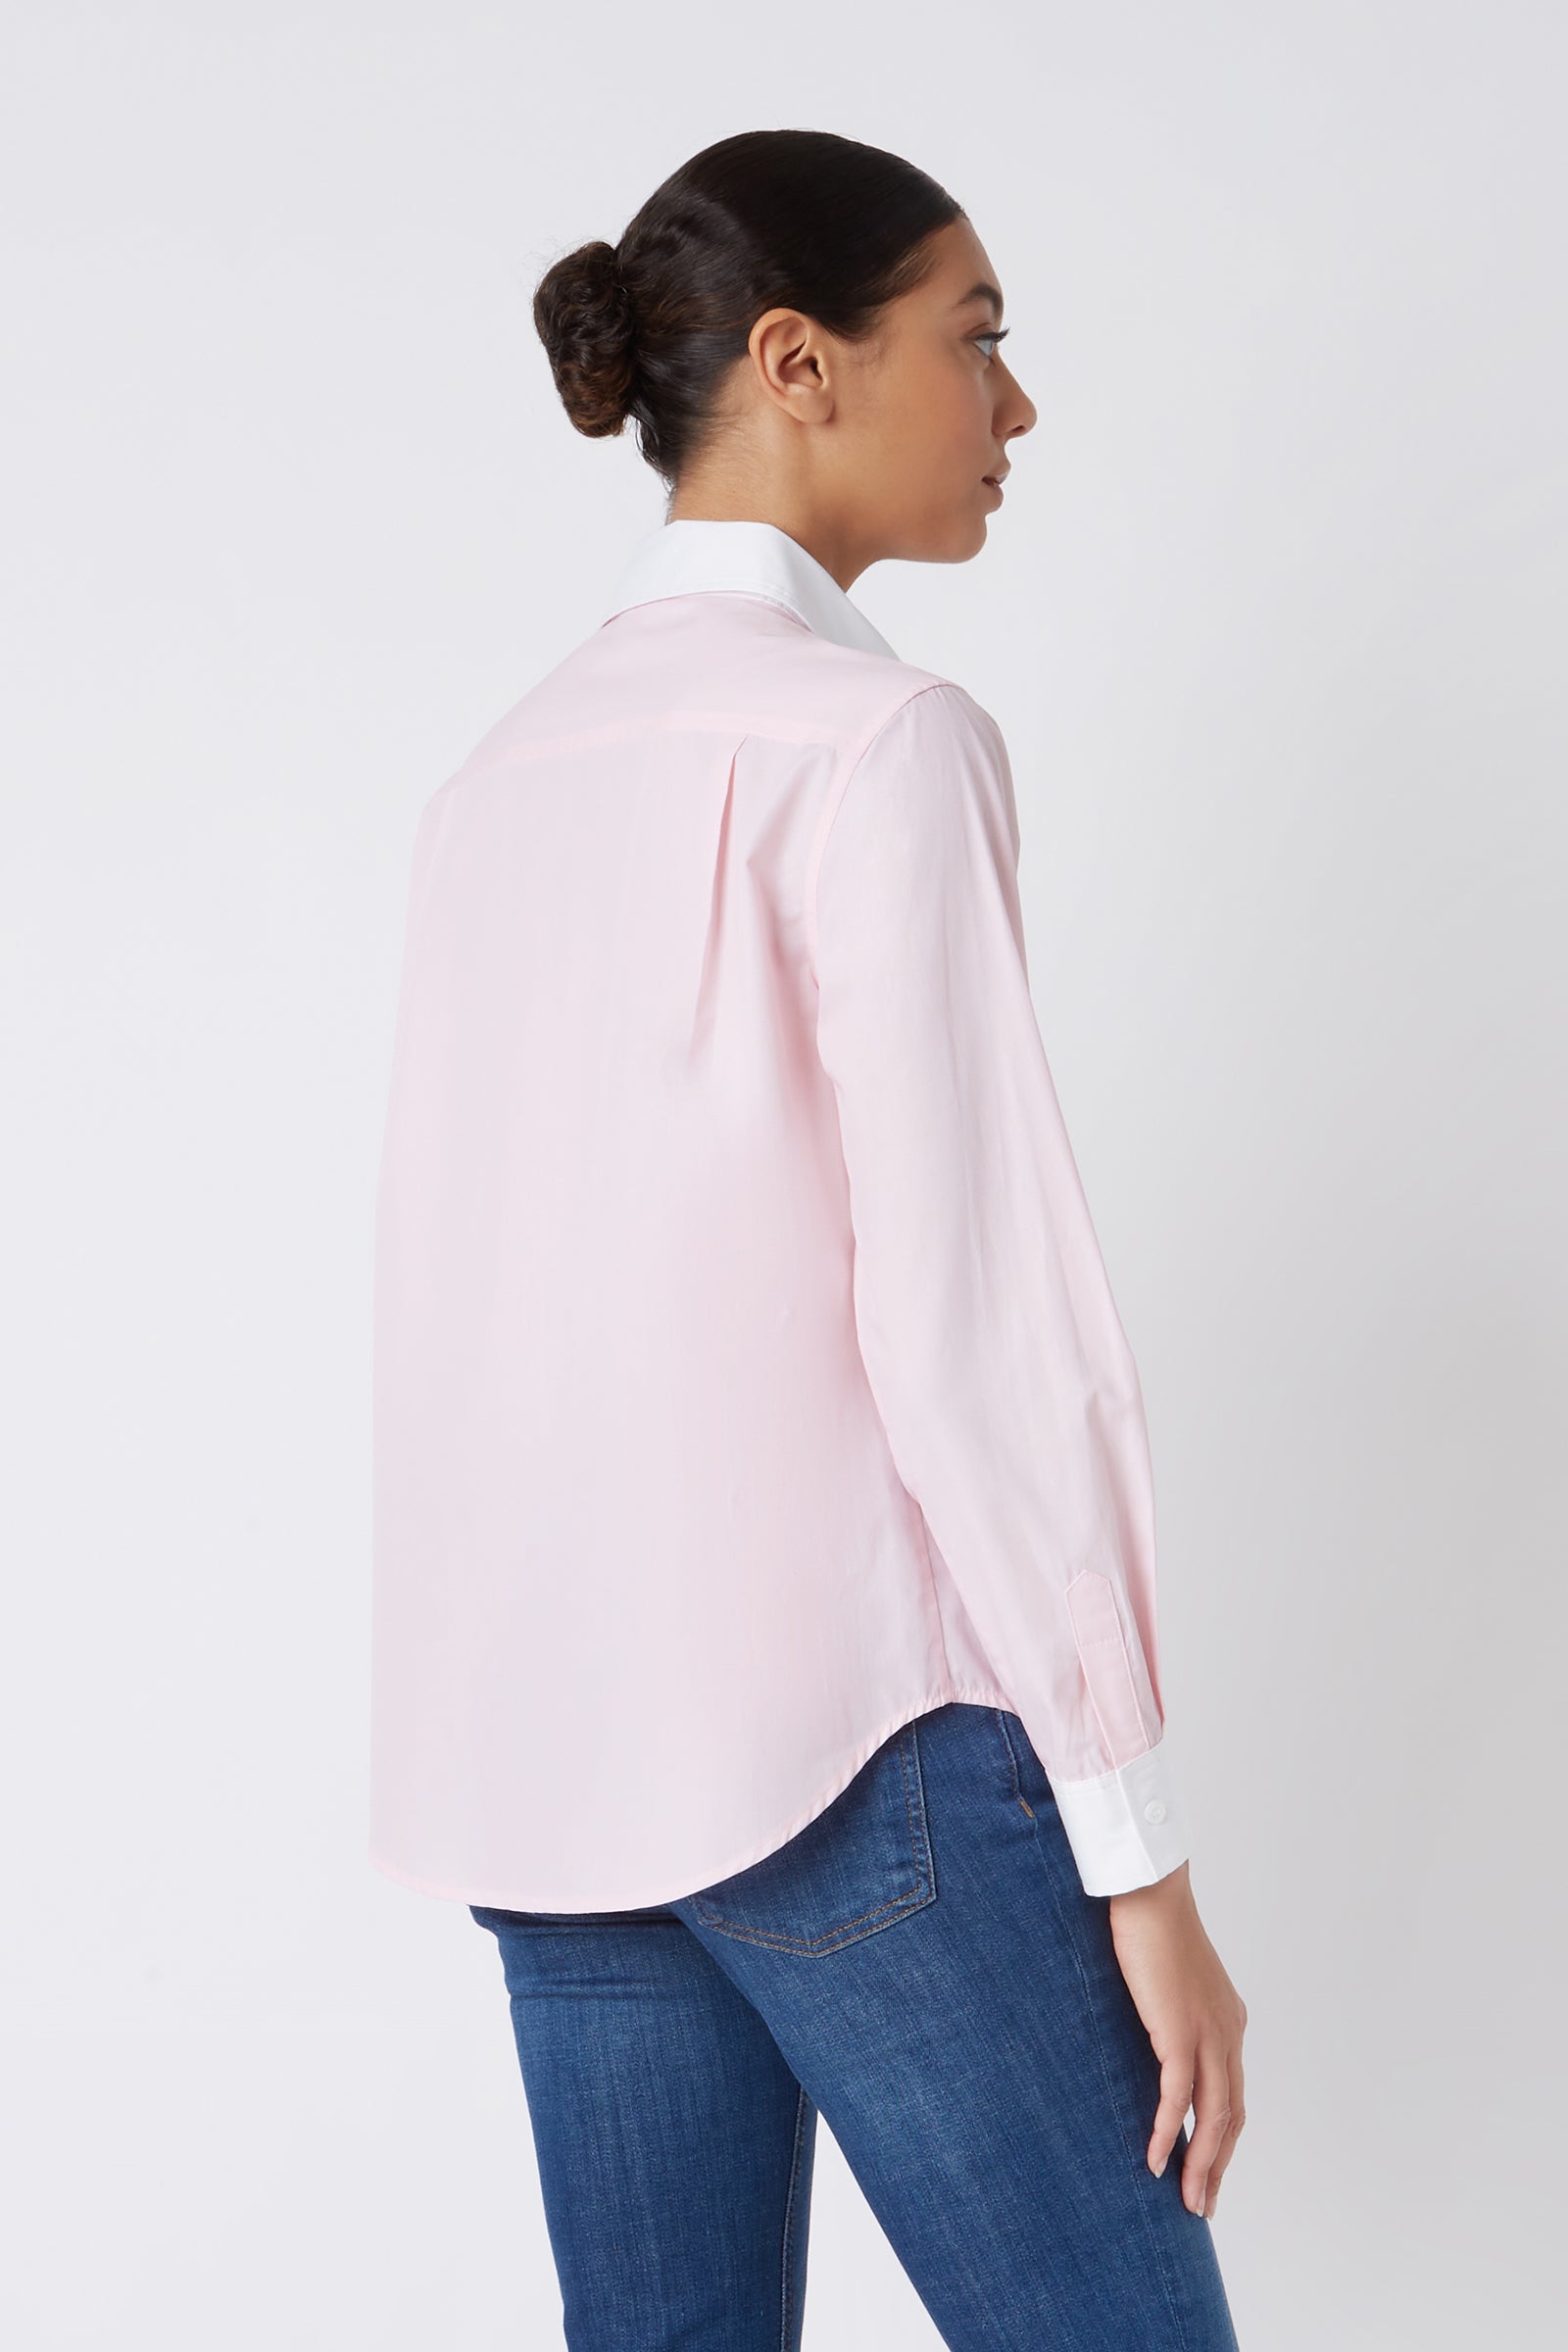 Kal Rieman Classic Tailored Shirt in Pink with White on Model Main Full Front View